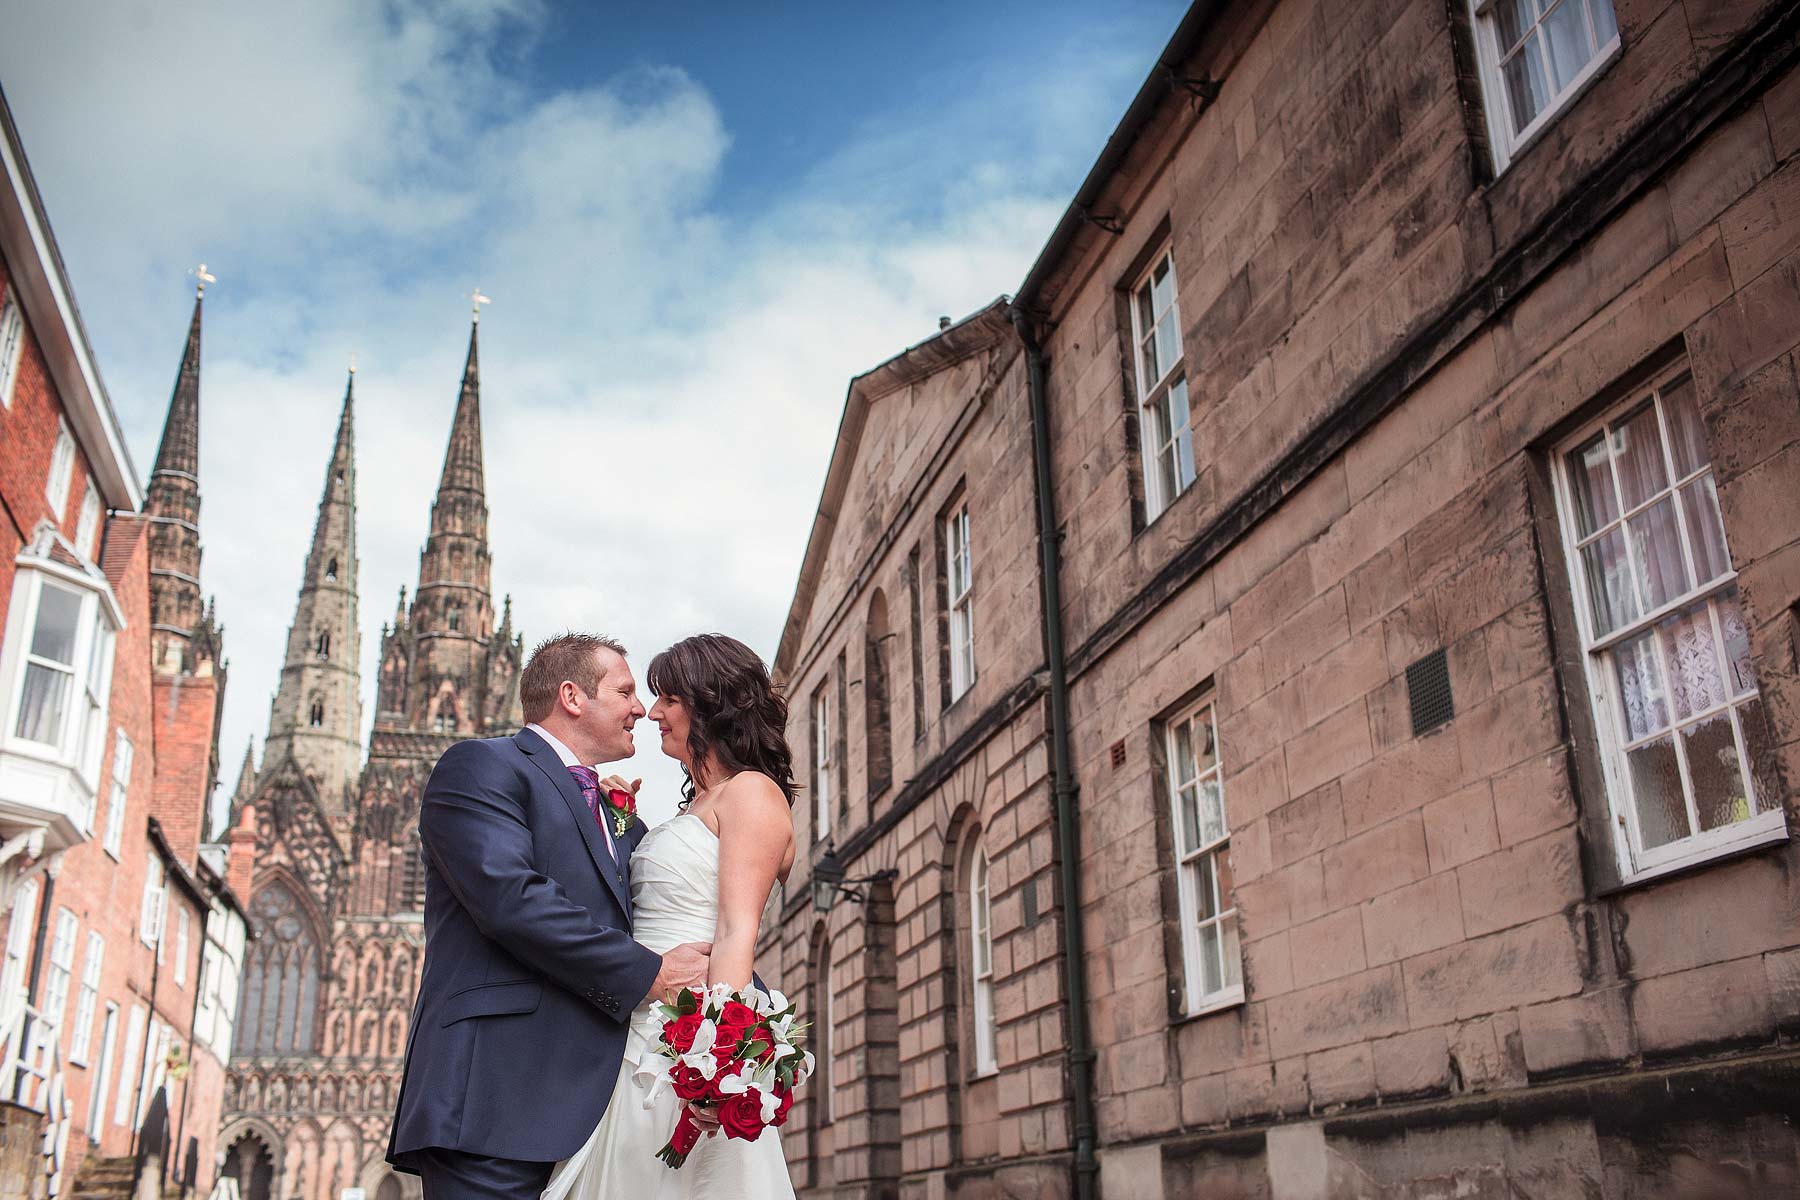 Creative modern wedding photography portraits in Lichfield City Centre in Staffordshire by Documentary Wedding Photographer Stuart James